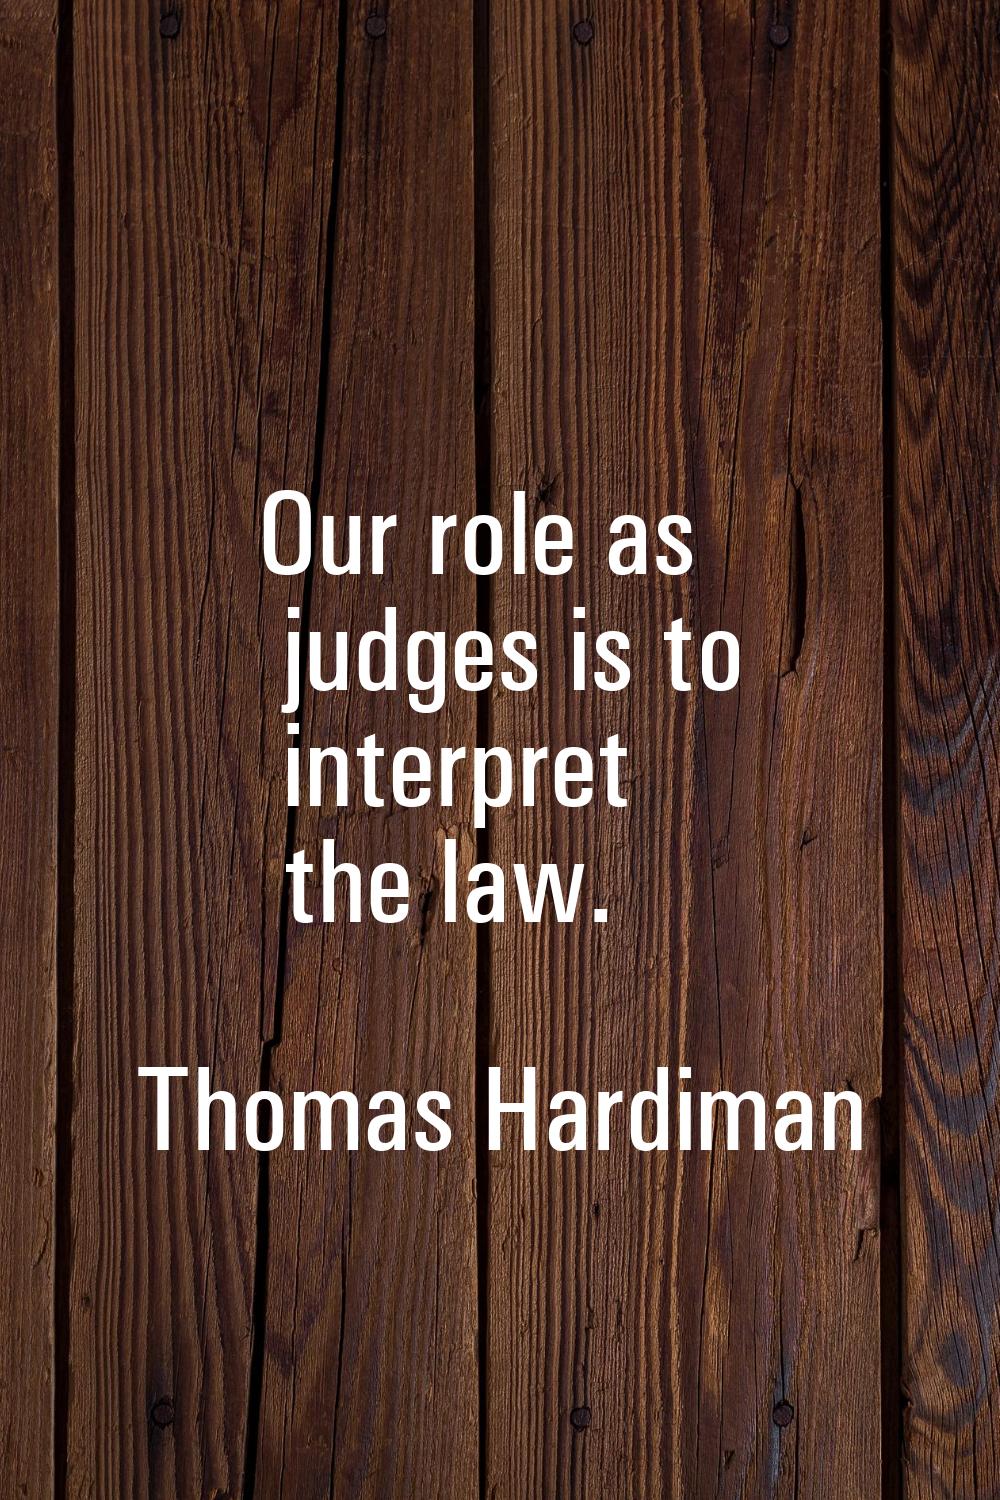 Our role as judges is to interpret the law.